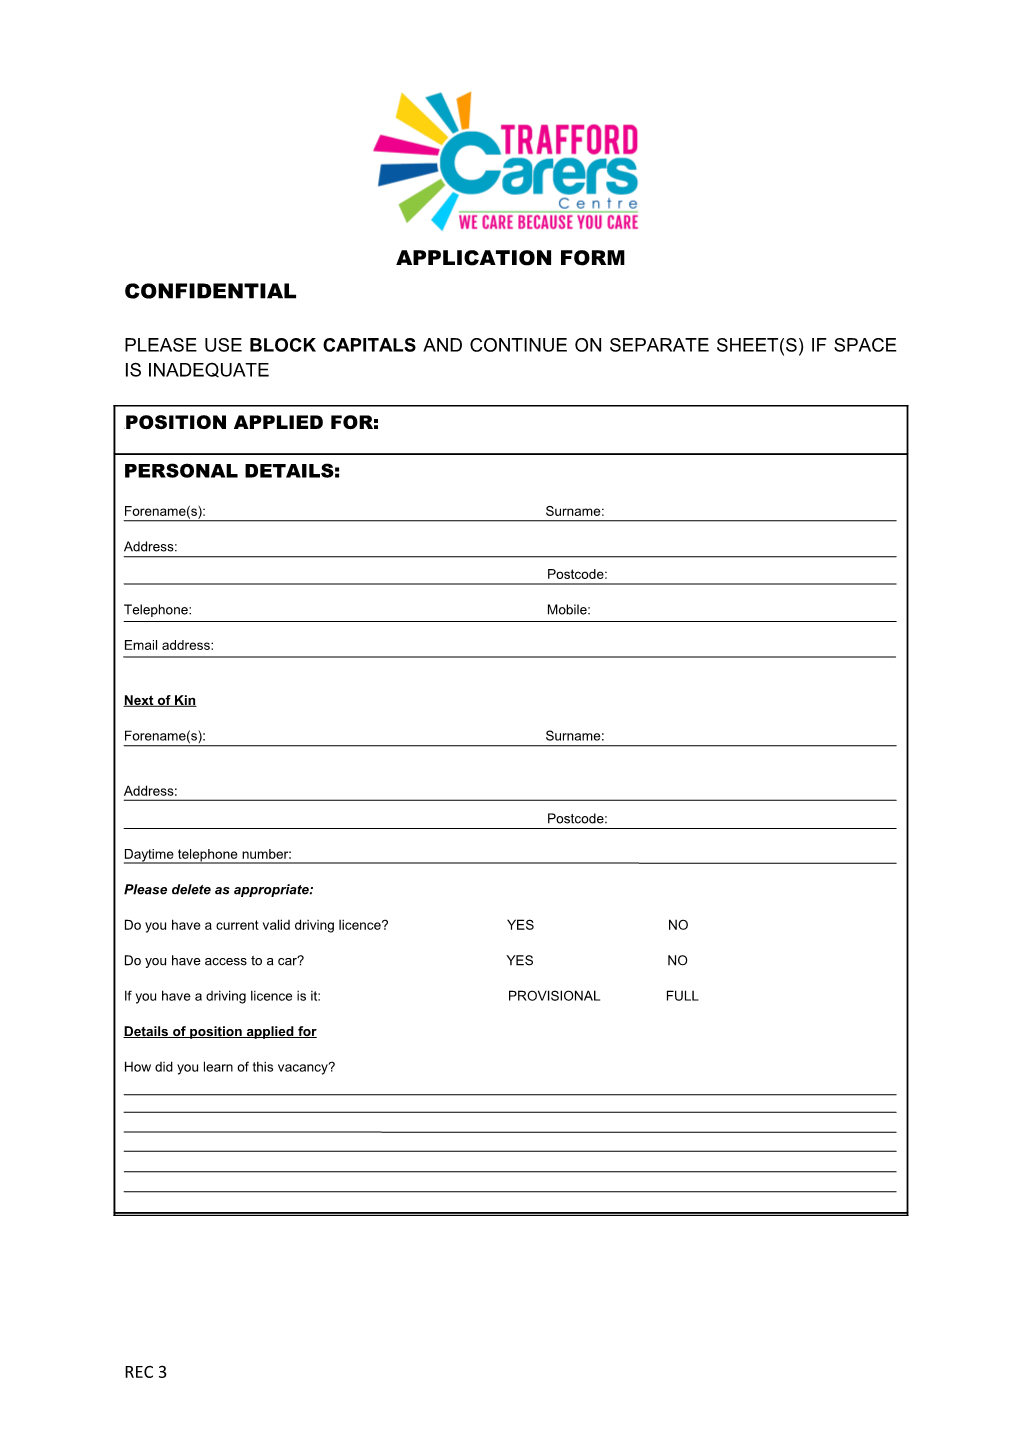 Please Return This Completed Application To